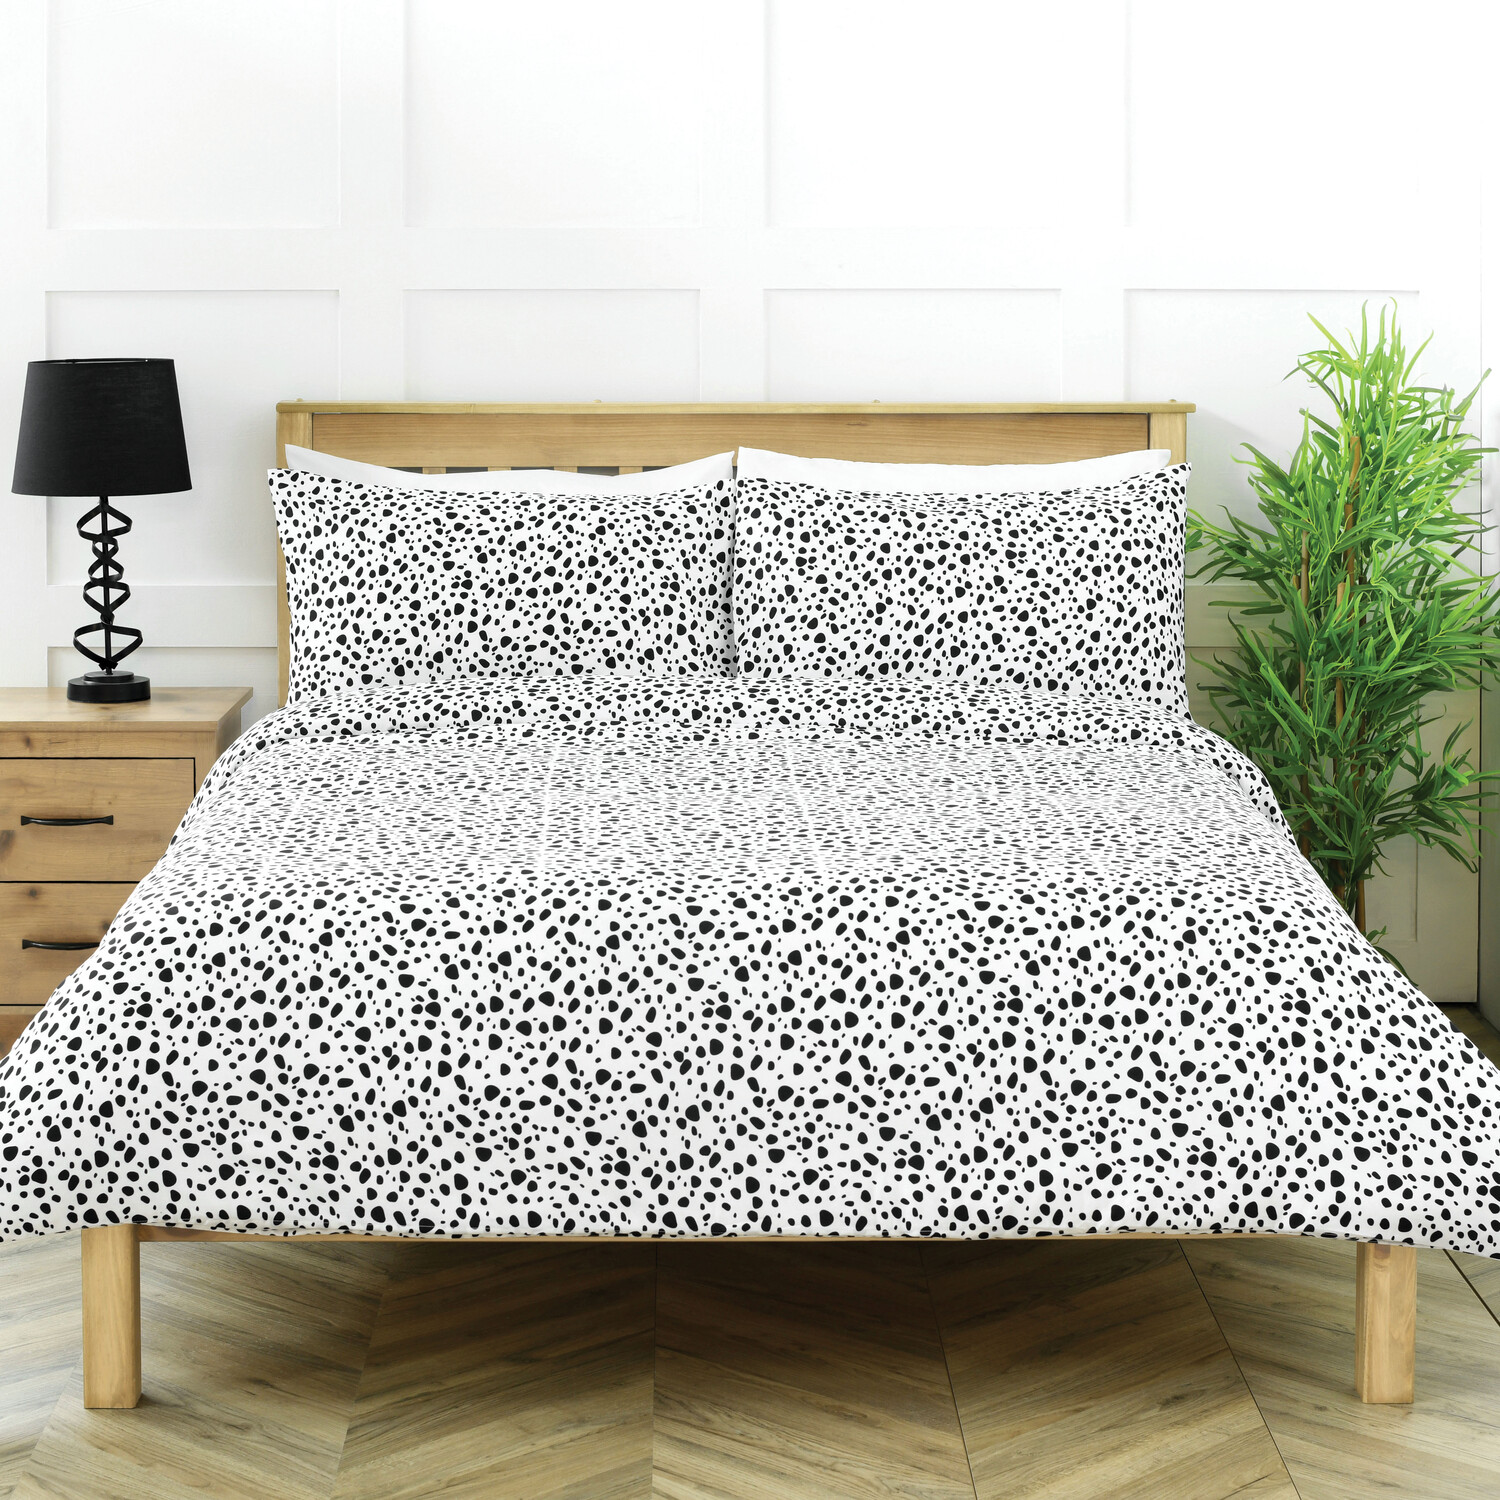 My Home Dottie King Size Monochrome Duvet Cover and Pillowcase Set Image 1